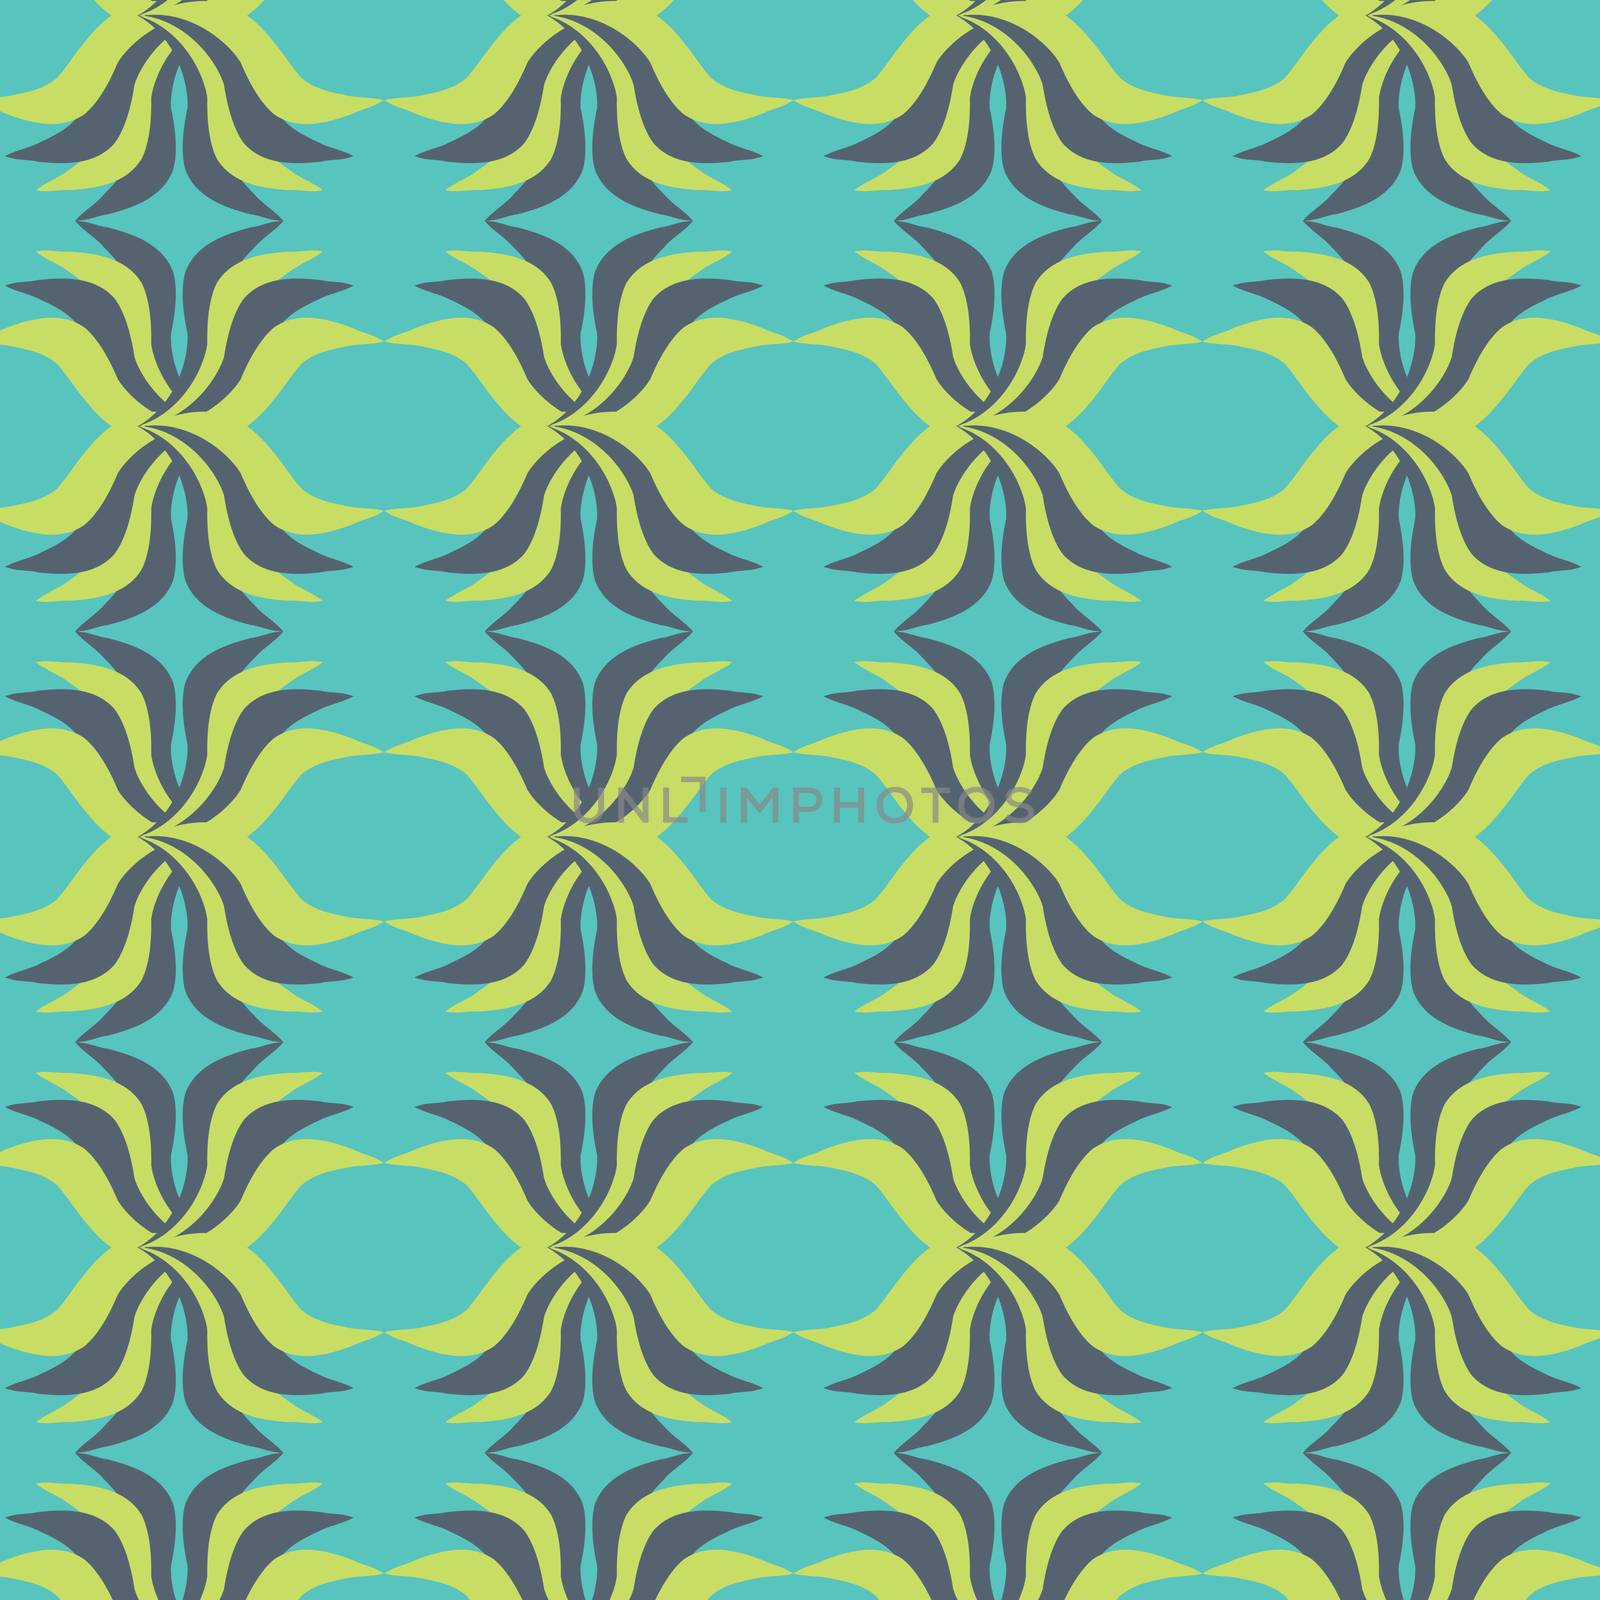 abstract seamless ornament pattern illustration